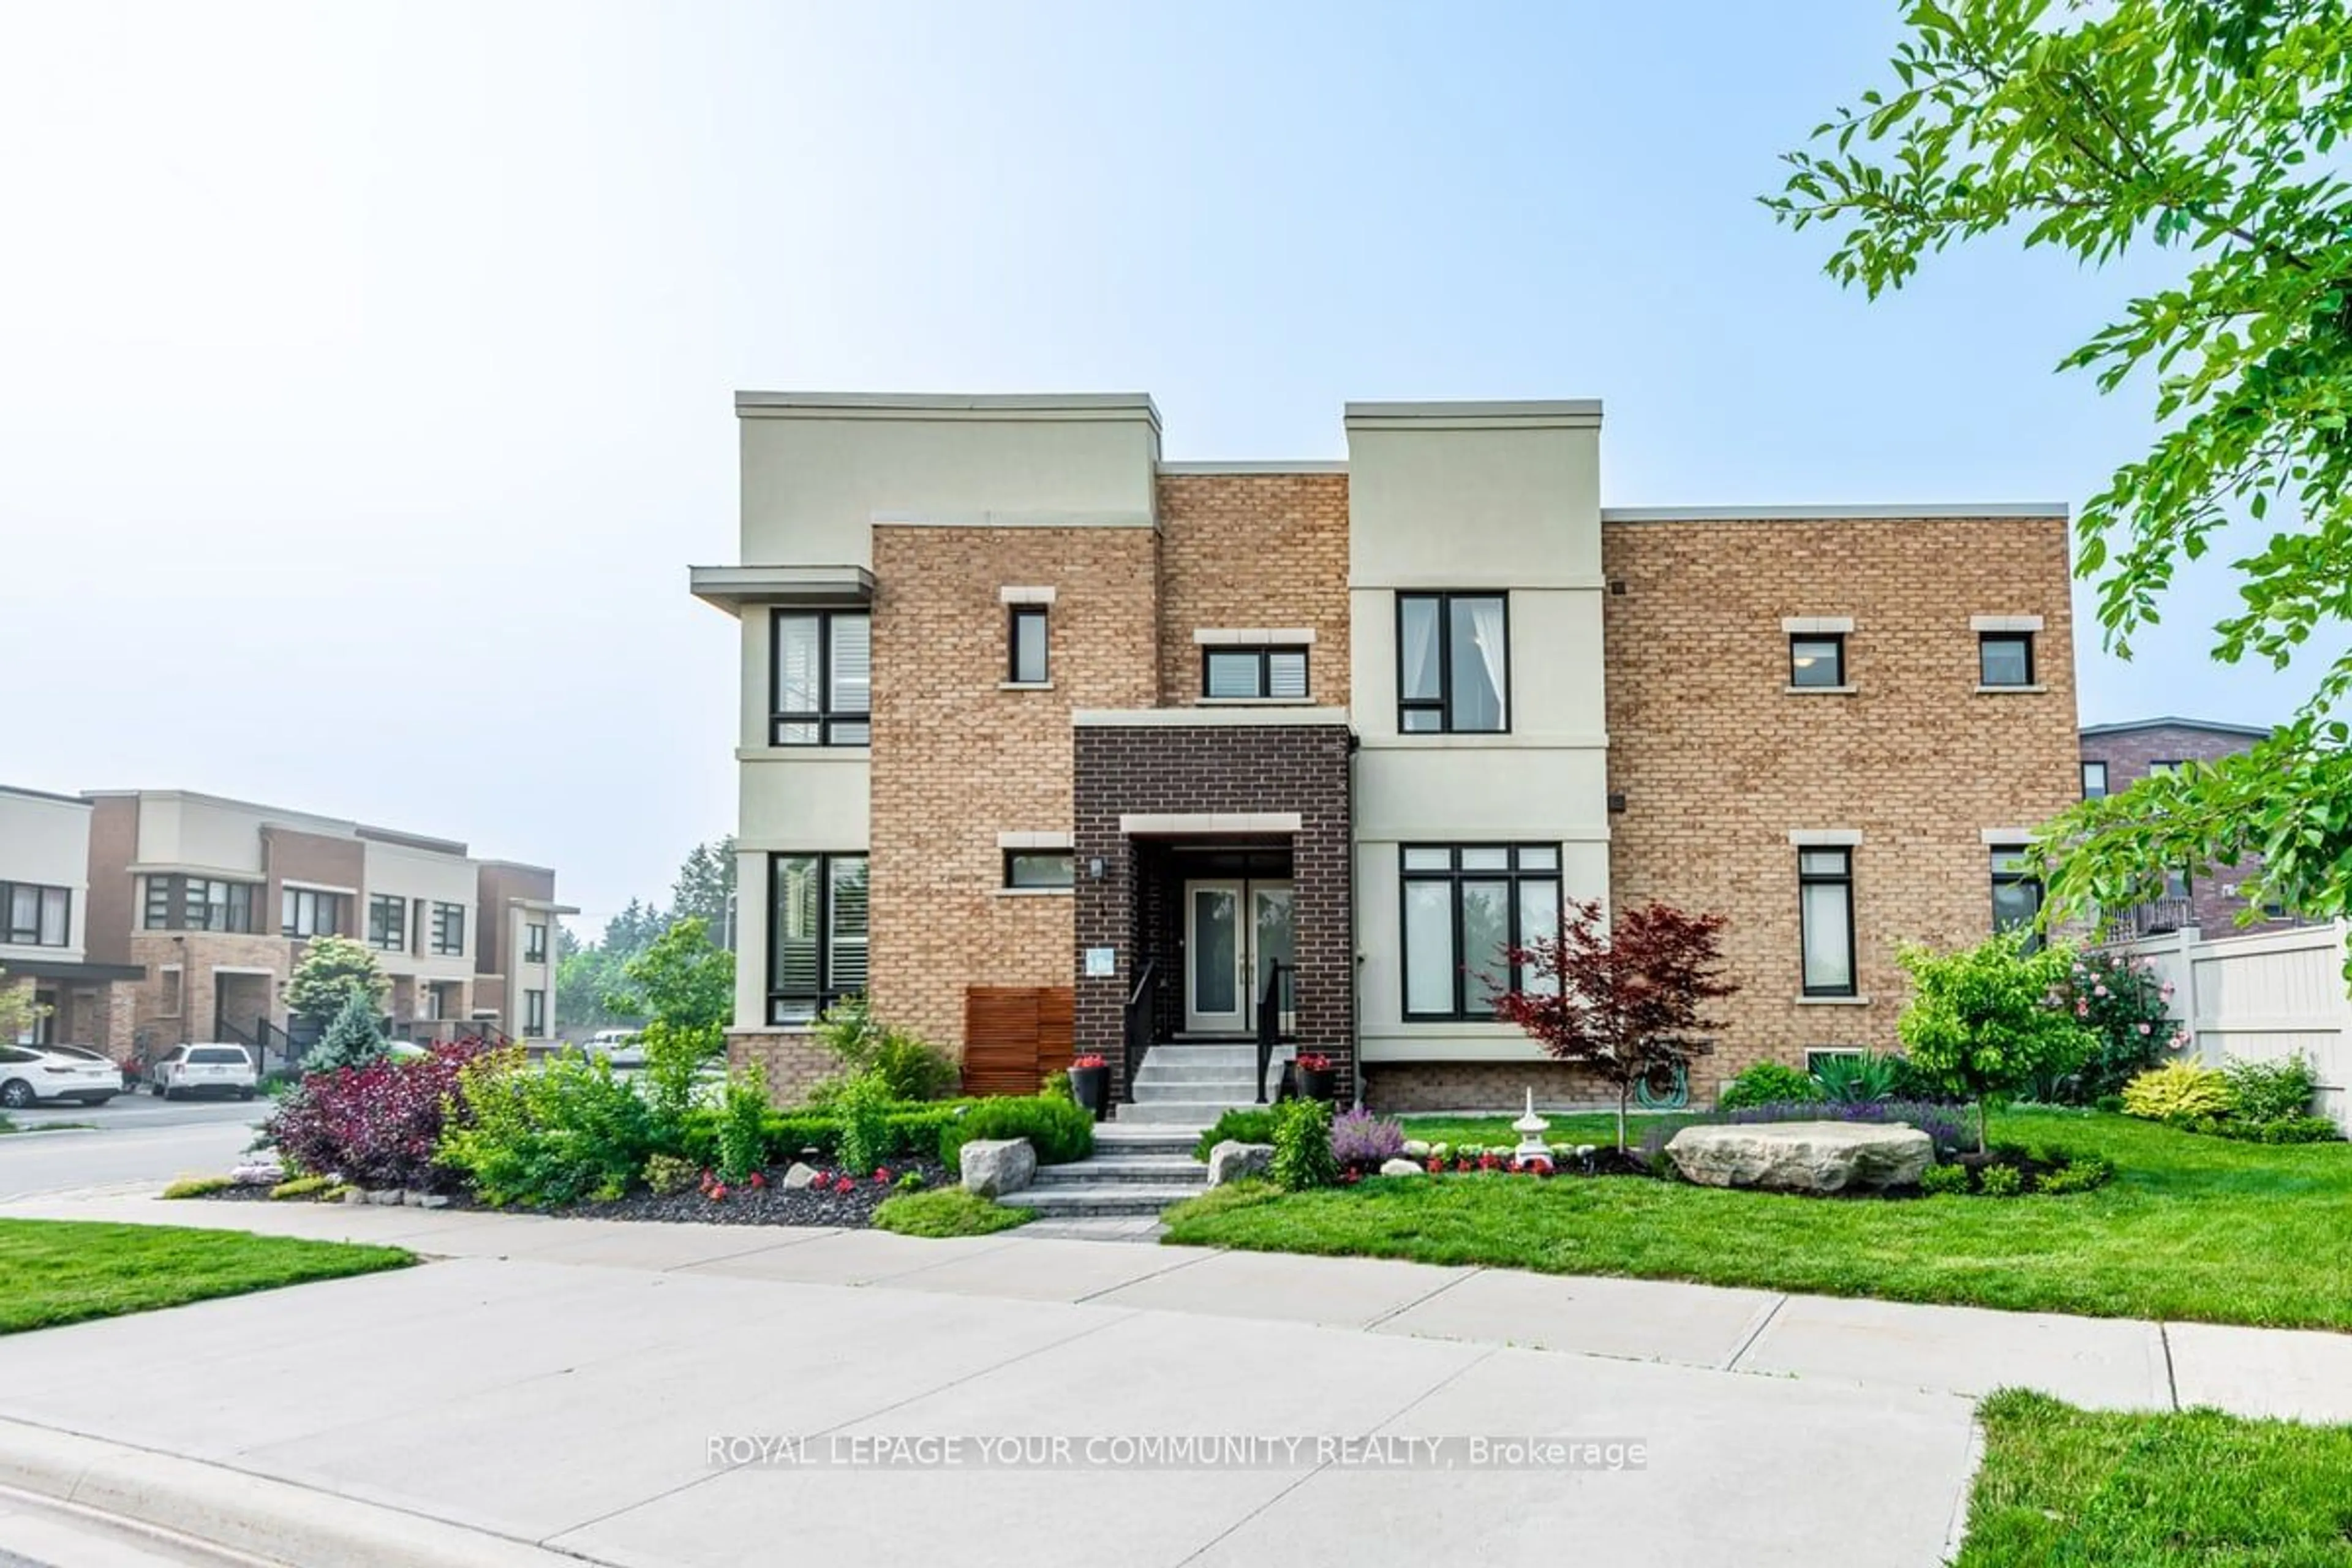 Home with brick exterior material for 1 Kohl St, Richmond Hill Ontario L4E 1C6